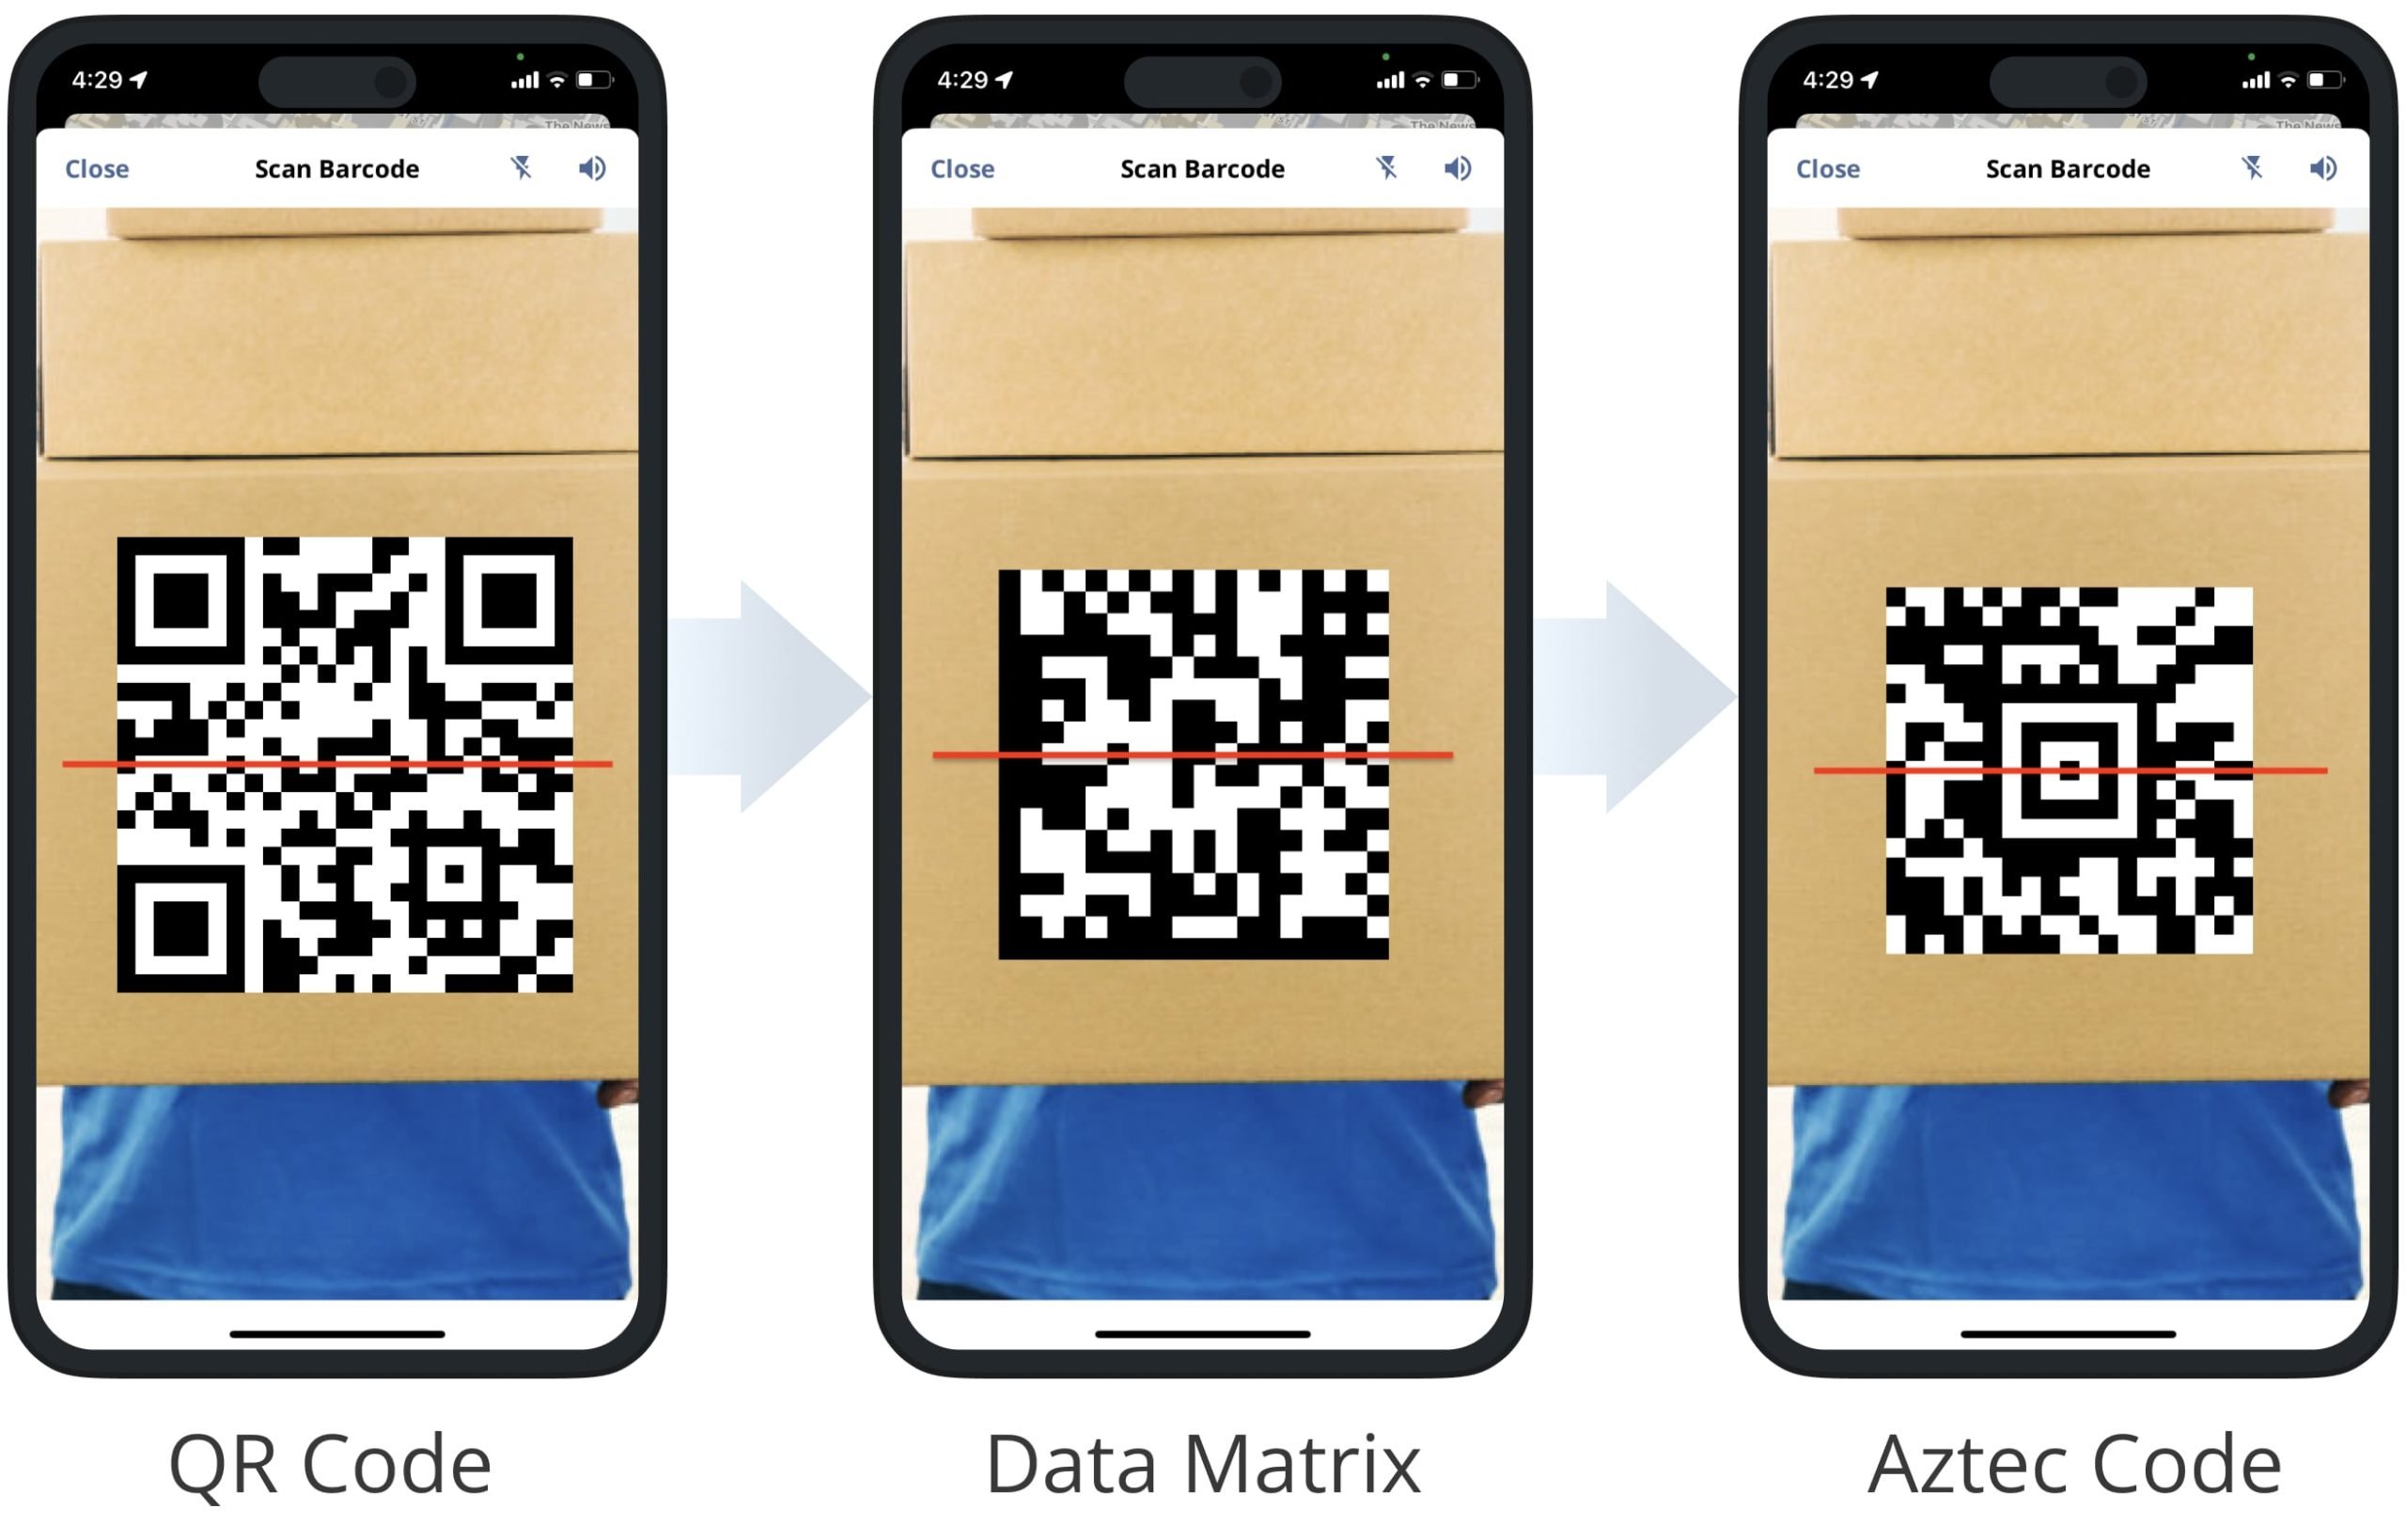 Scan QR Codes, Data Matrix, and Aztec Codes using Route4Me's iOS Mobile Route Planner in-app barcode scanner.